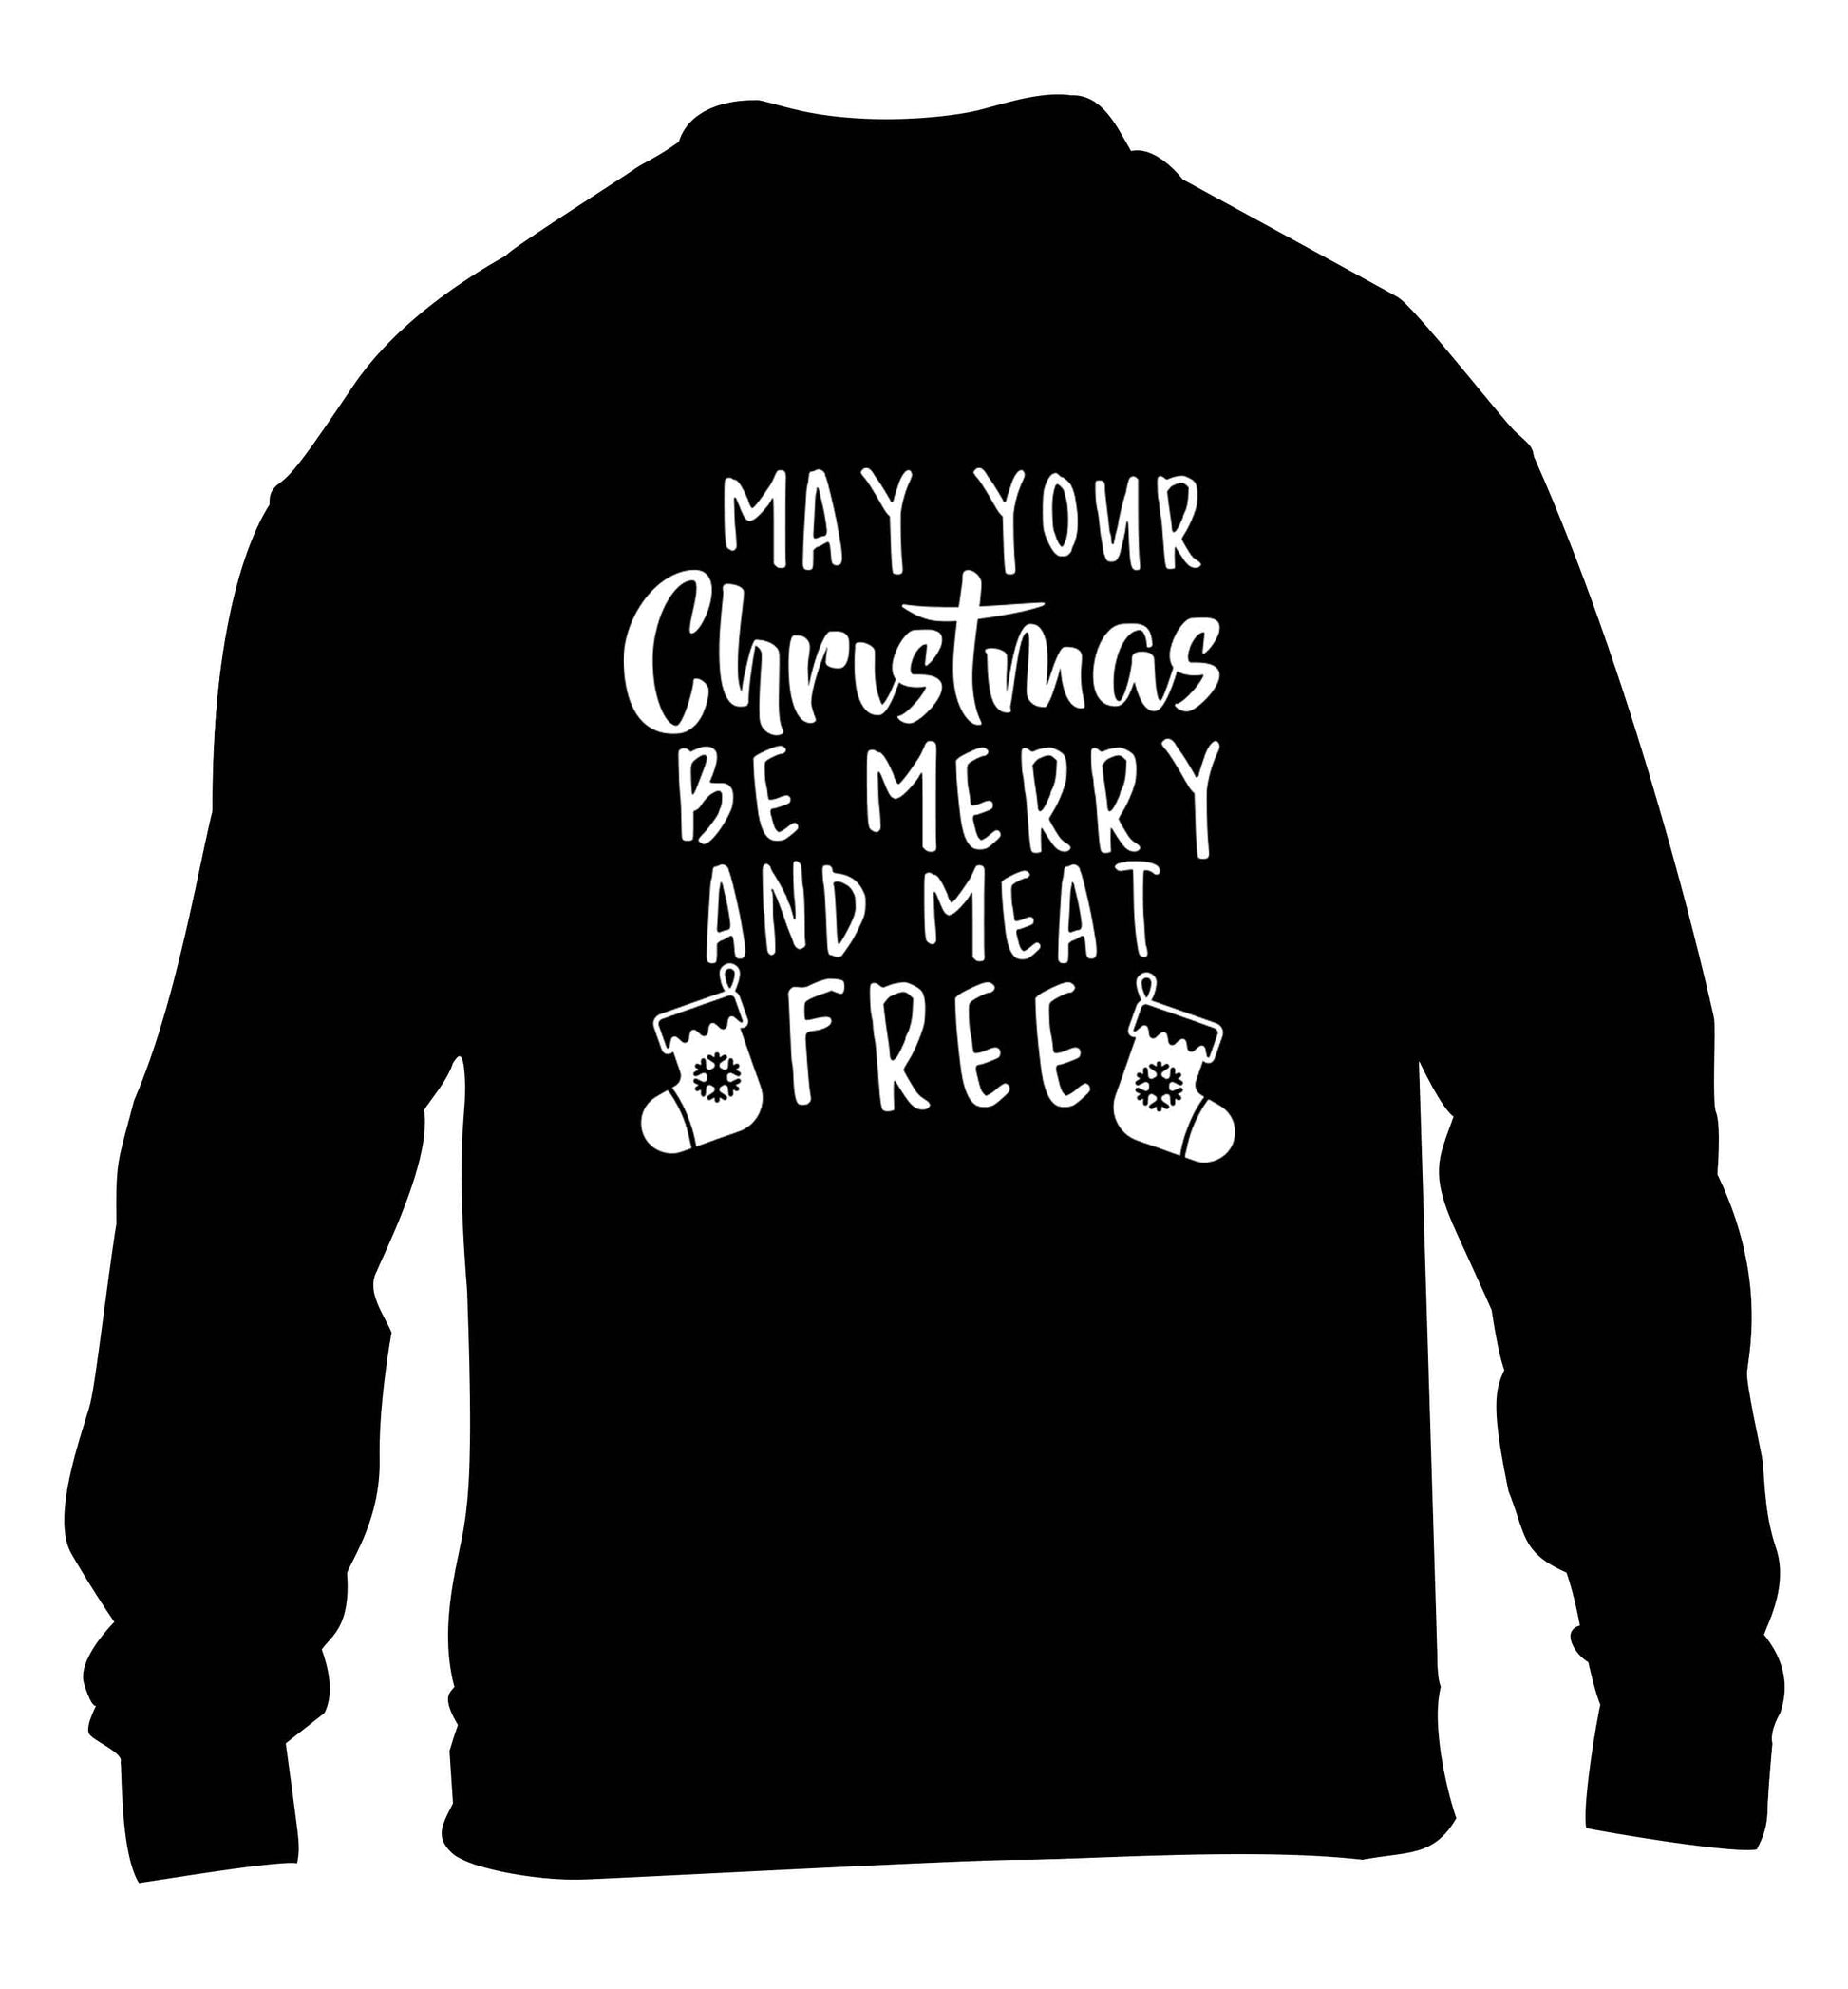 May your Christmas be merry and meat free children's black sweater 12-13 Years